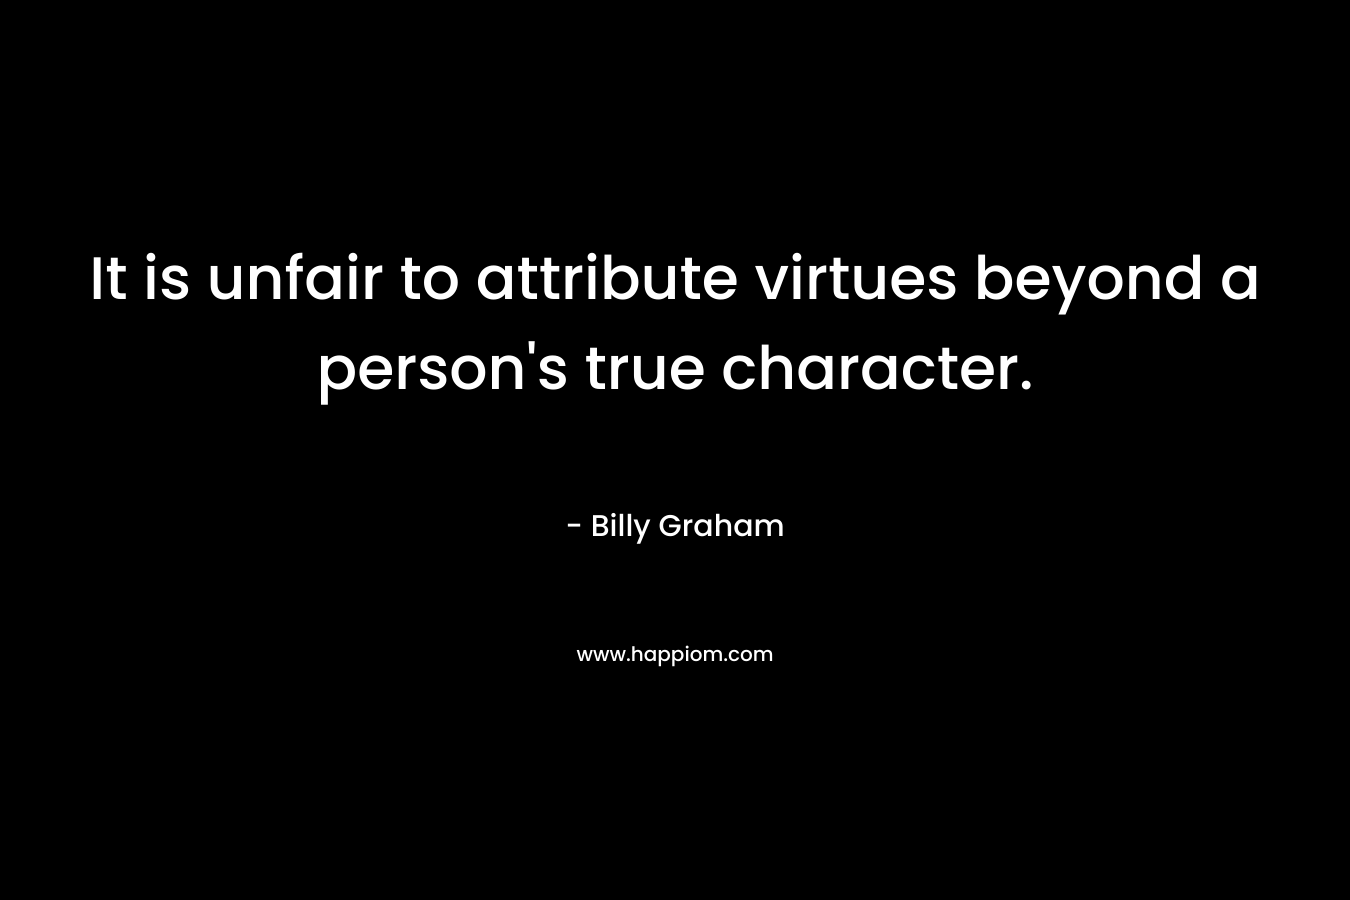 It is unfair to attribute virtues beyond a person's true character.